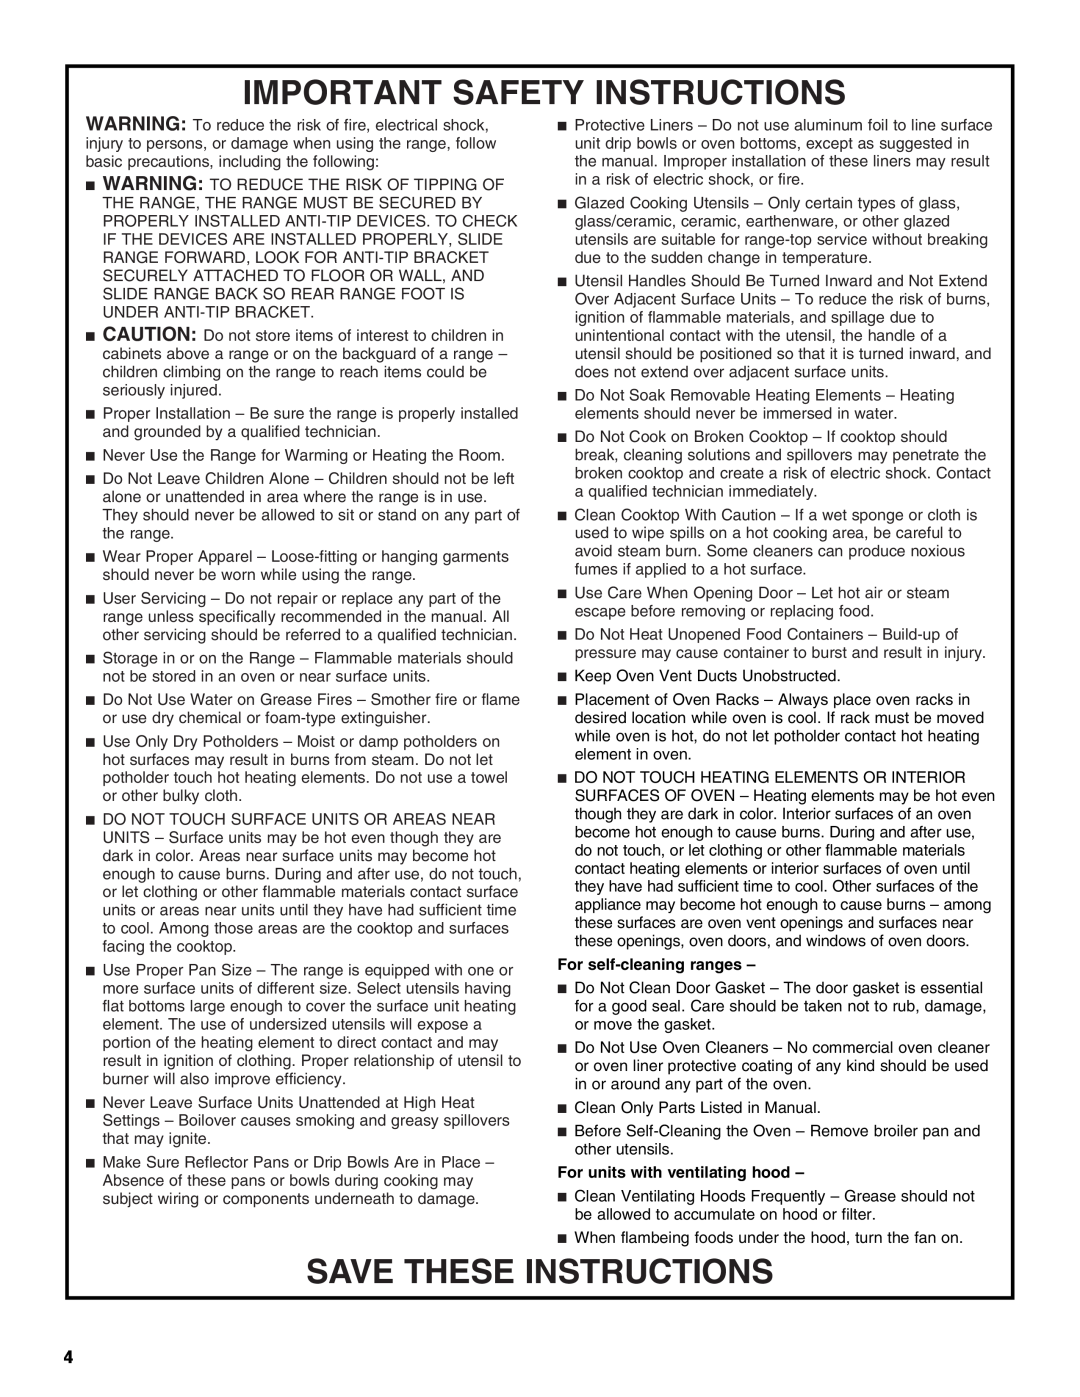 Whirlpool GGG388LXQ, GGG390LXB, GGG388LXS Important Safety Instructions, Save These Instructions, For self-cleaning ranges 